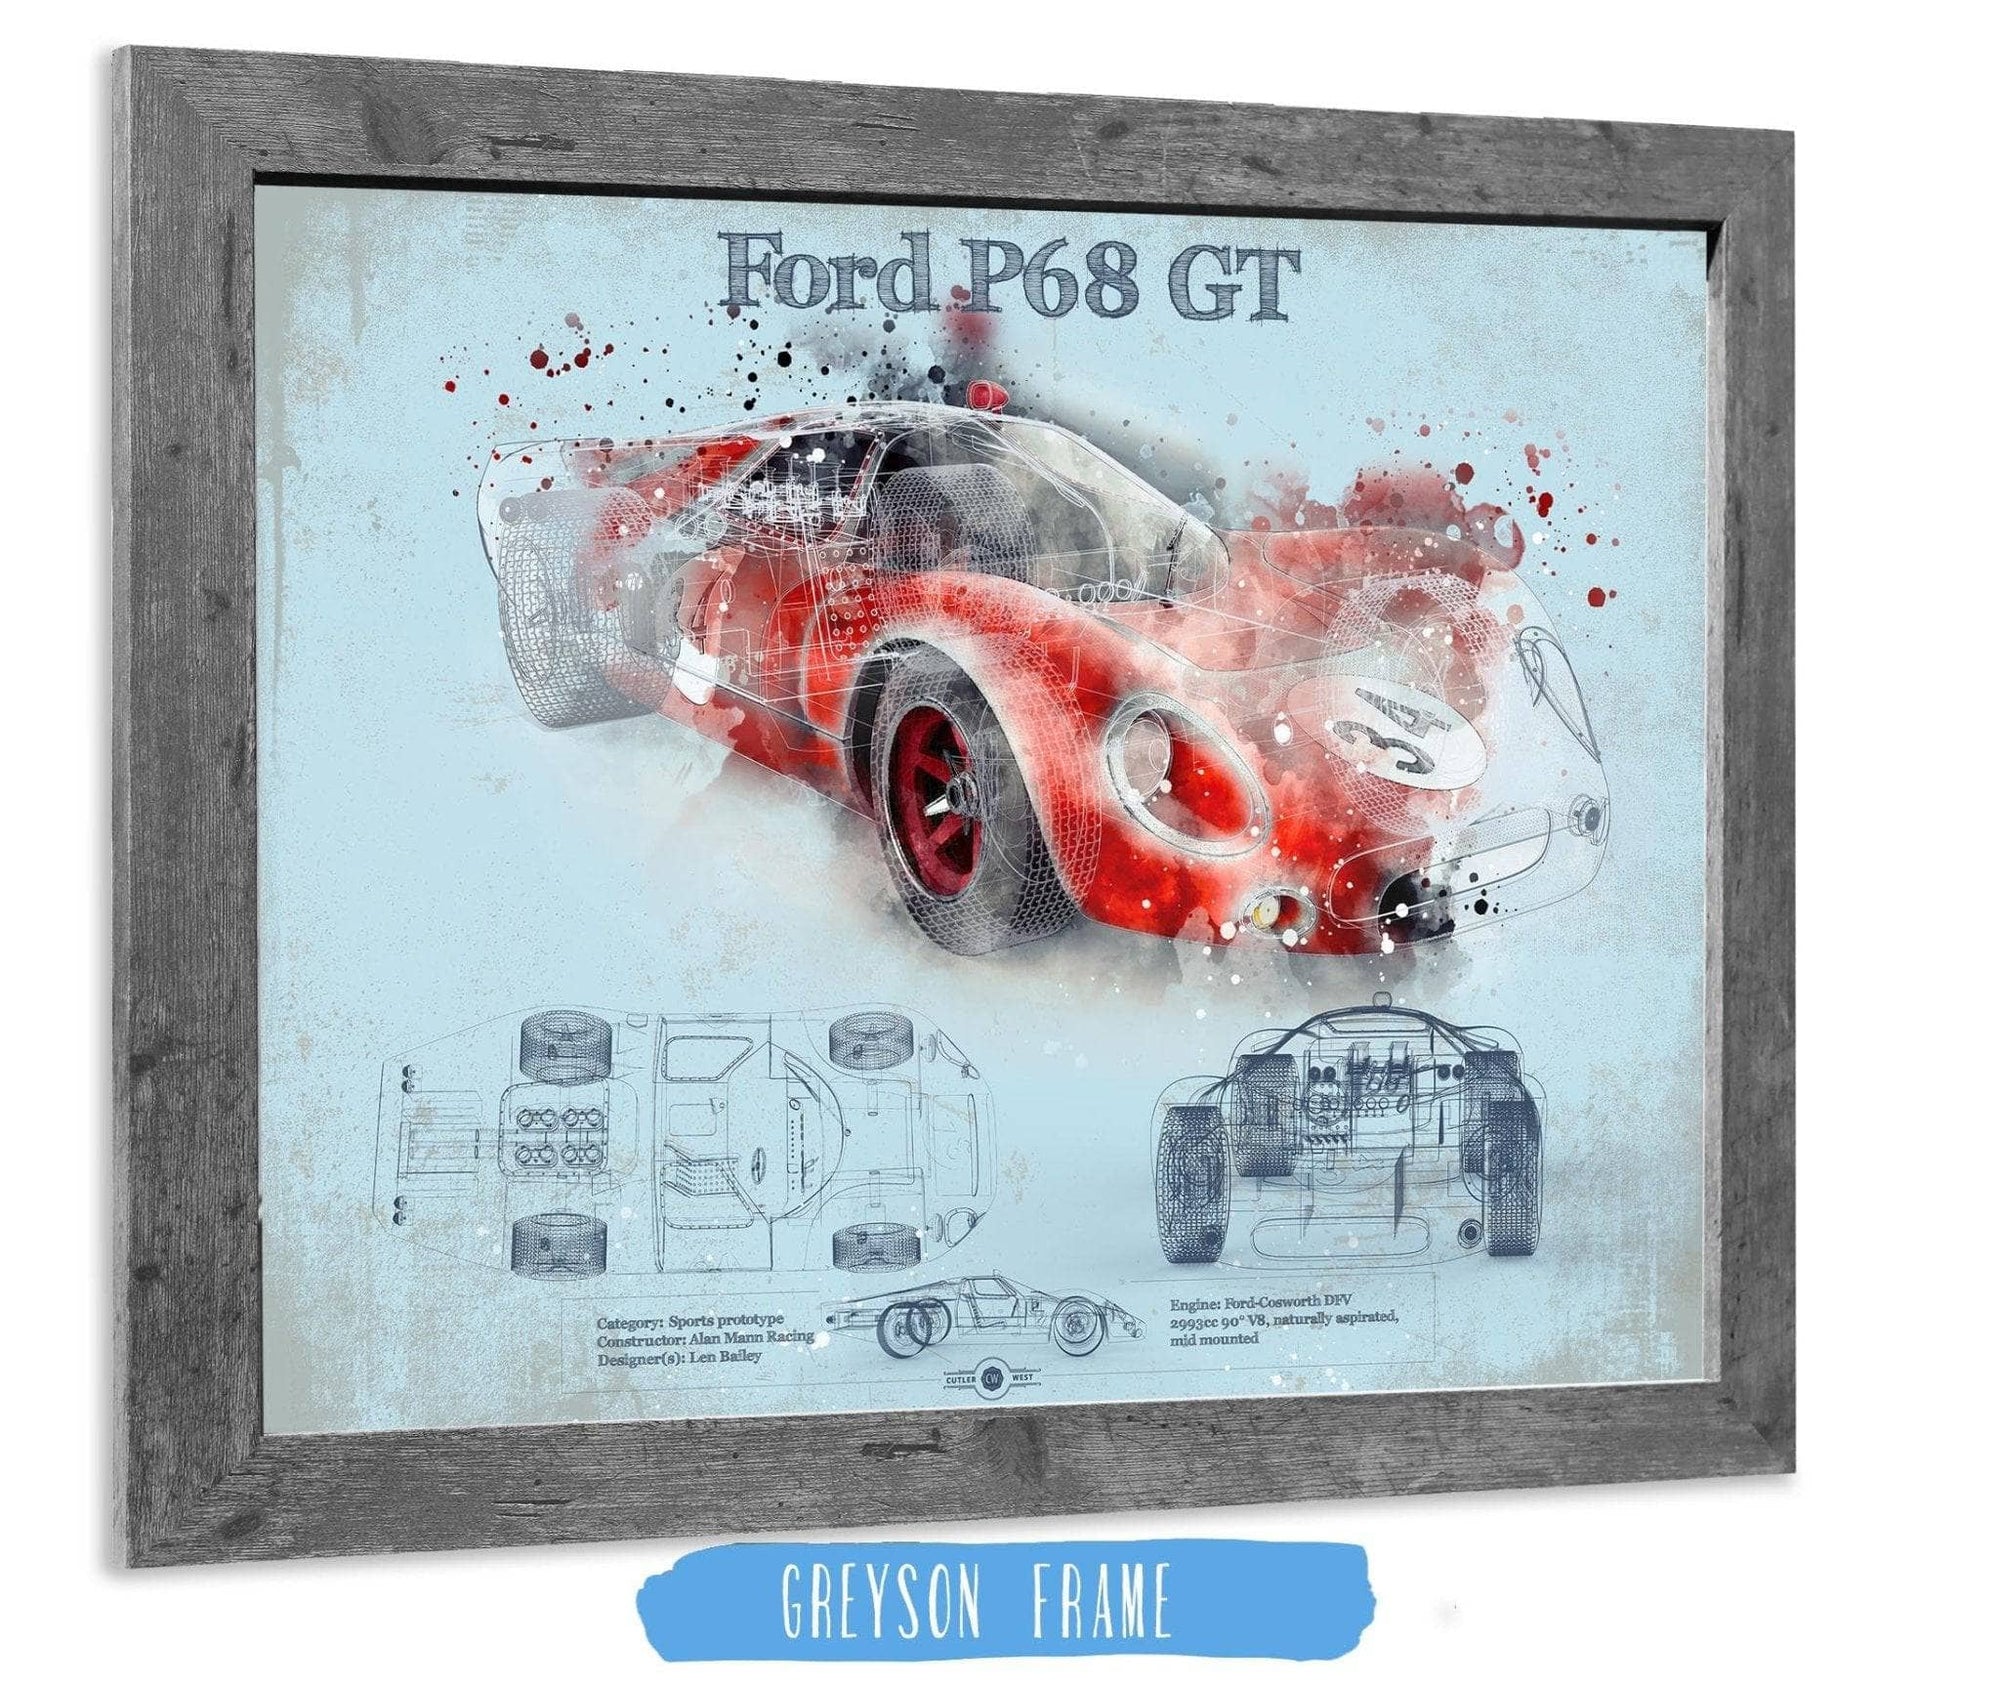 Cutler West Ford Collection 14" x 11" / Greyson Frame Ford P68 Ford 3L GT  F3L Vintage Sports Car Print 845000145_13791